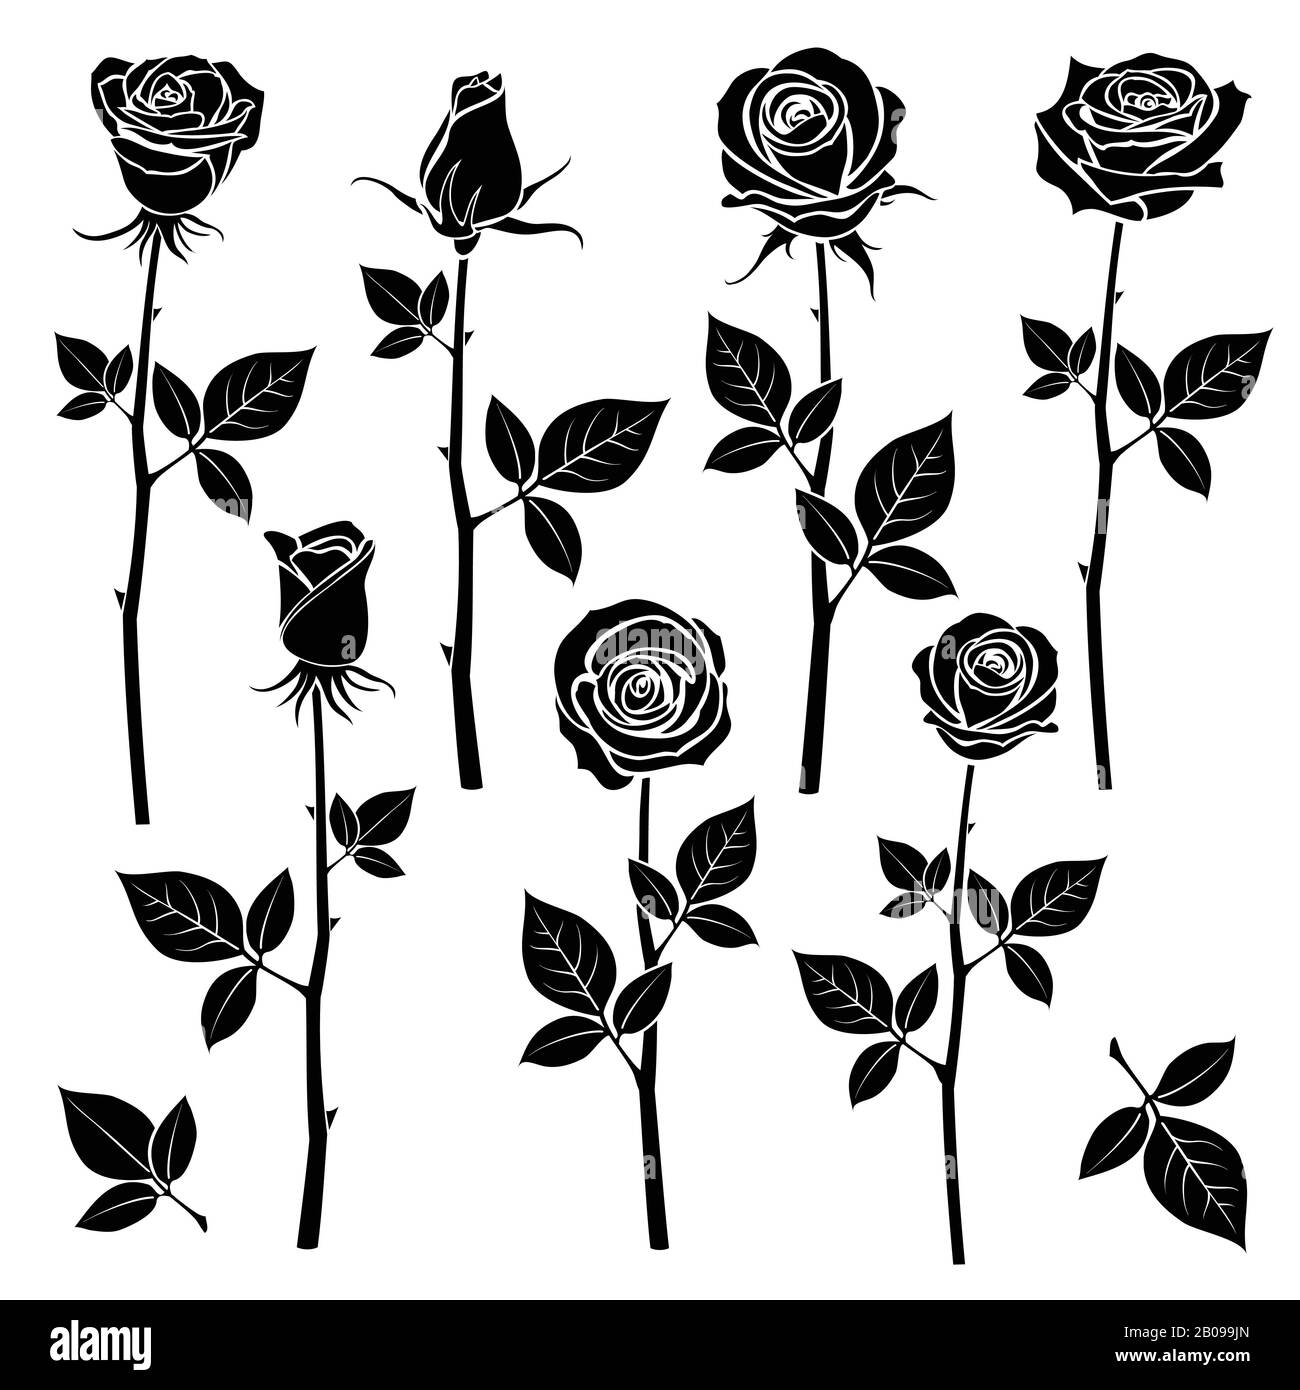 Reply to tcass5280 wow that rose turned out so dope whiteonblackt   TikTok